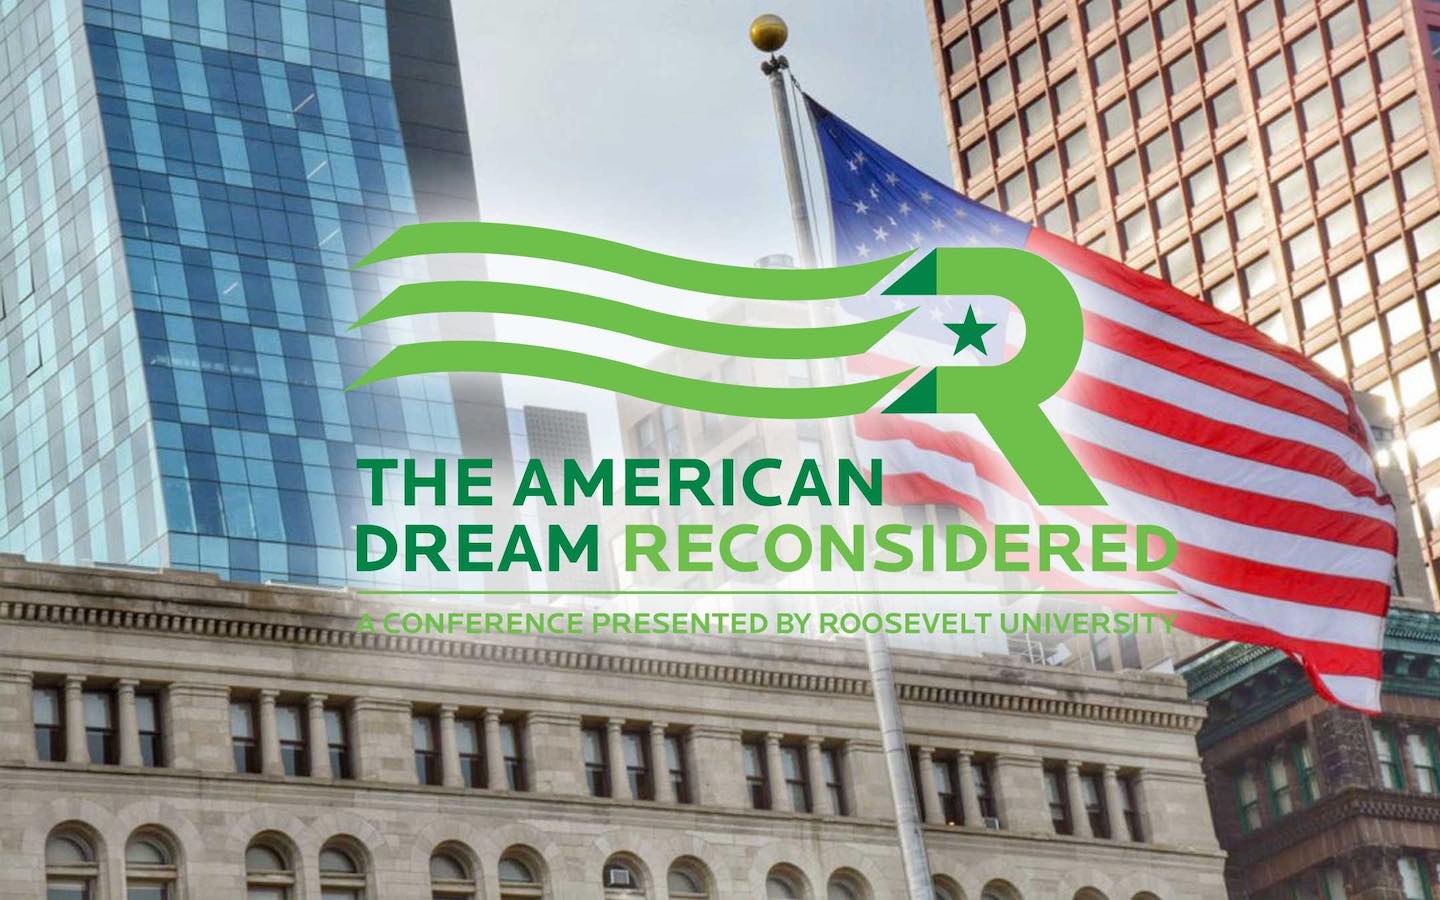 The American Dream Reconsidered Conference